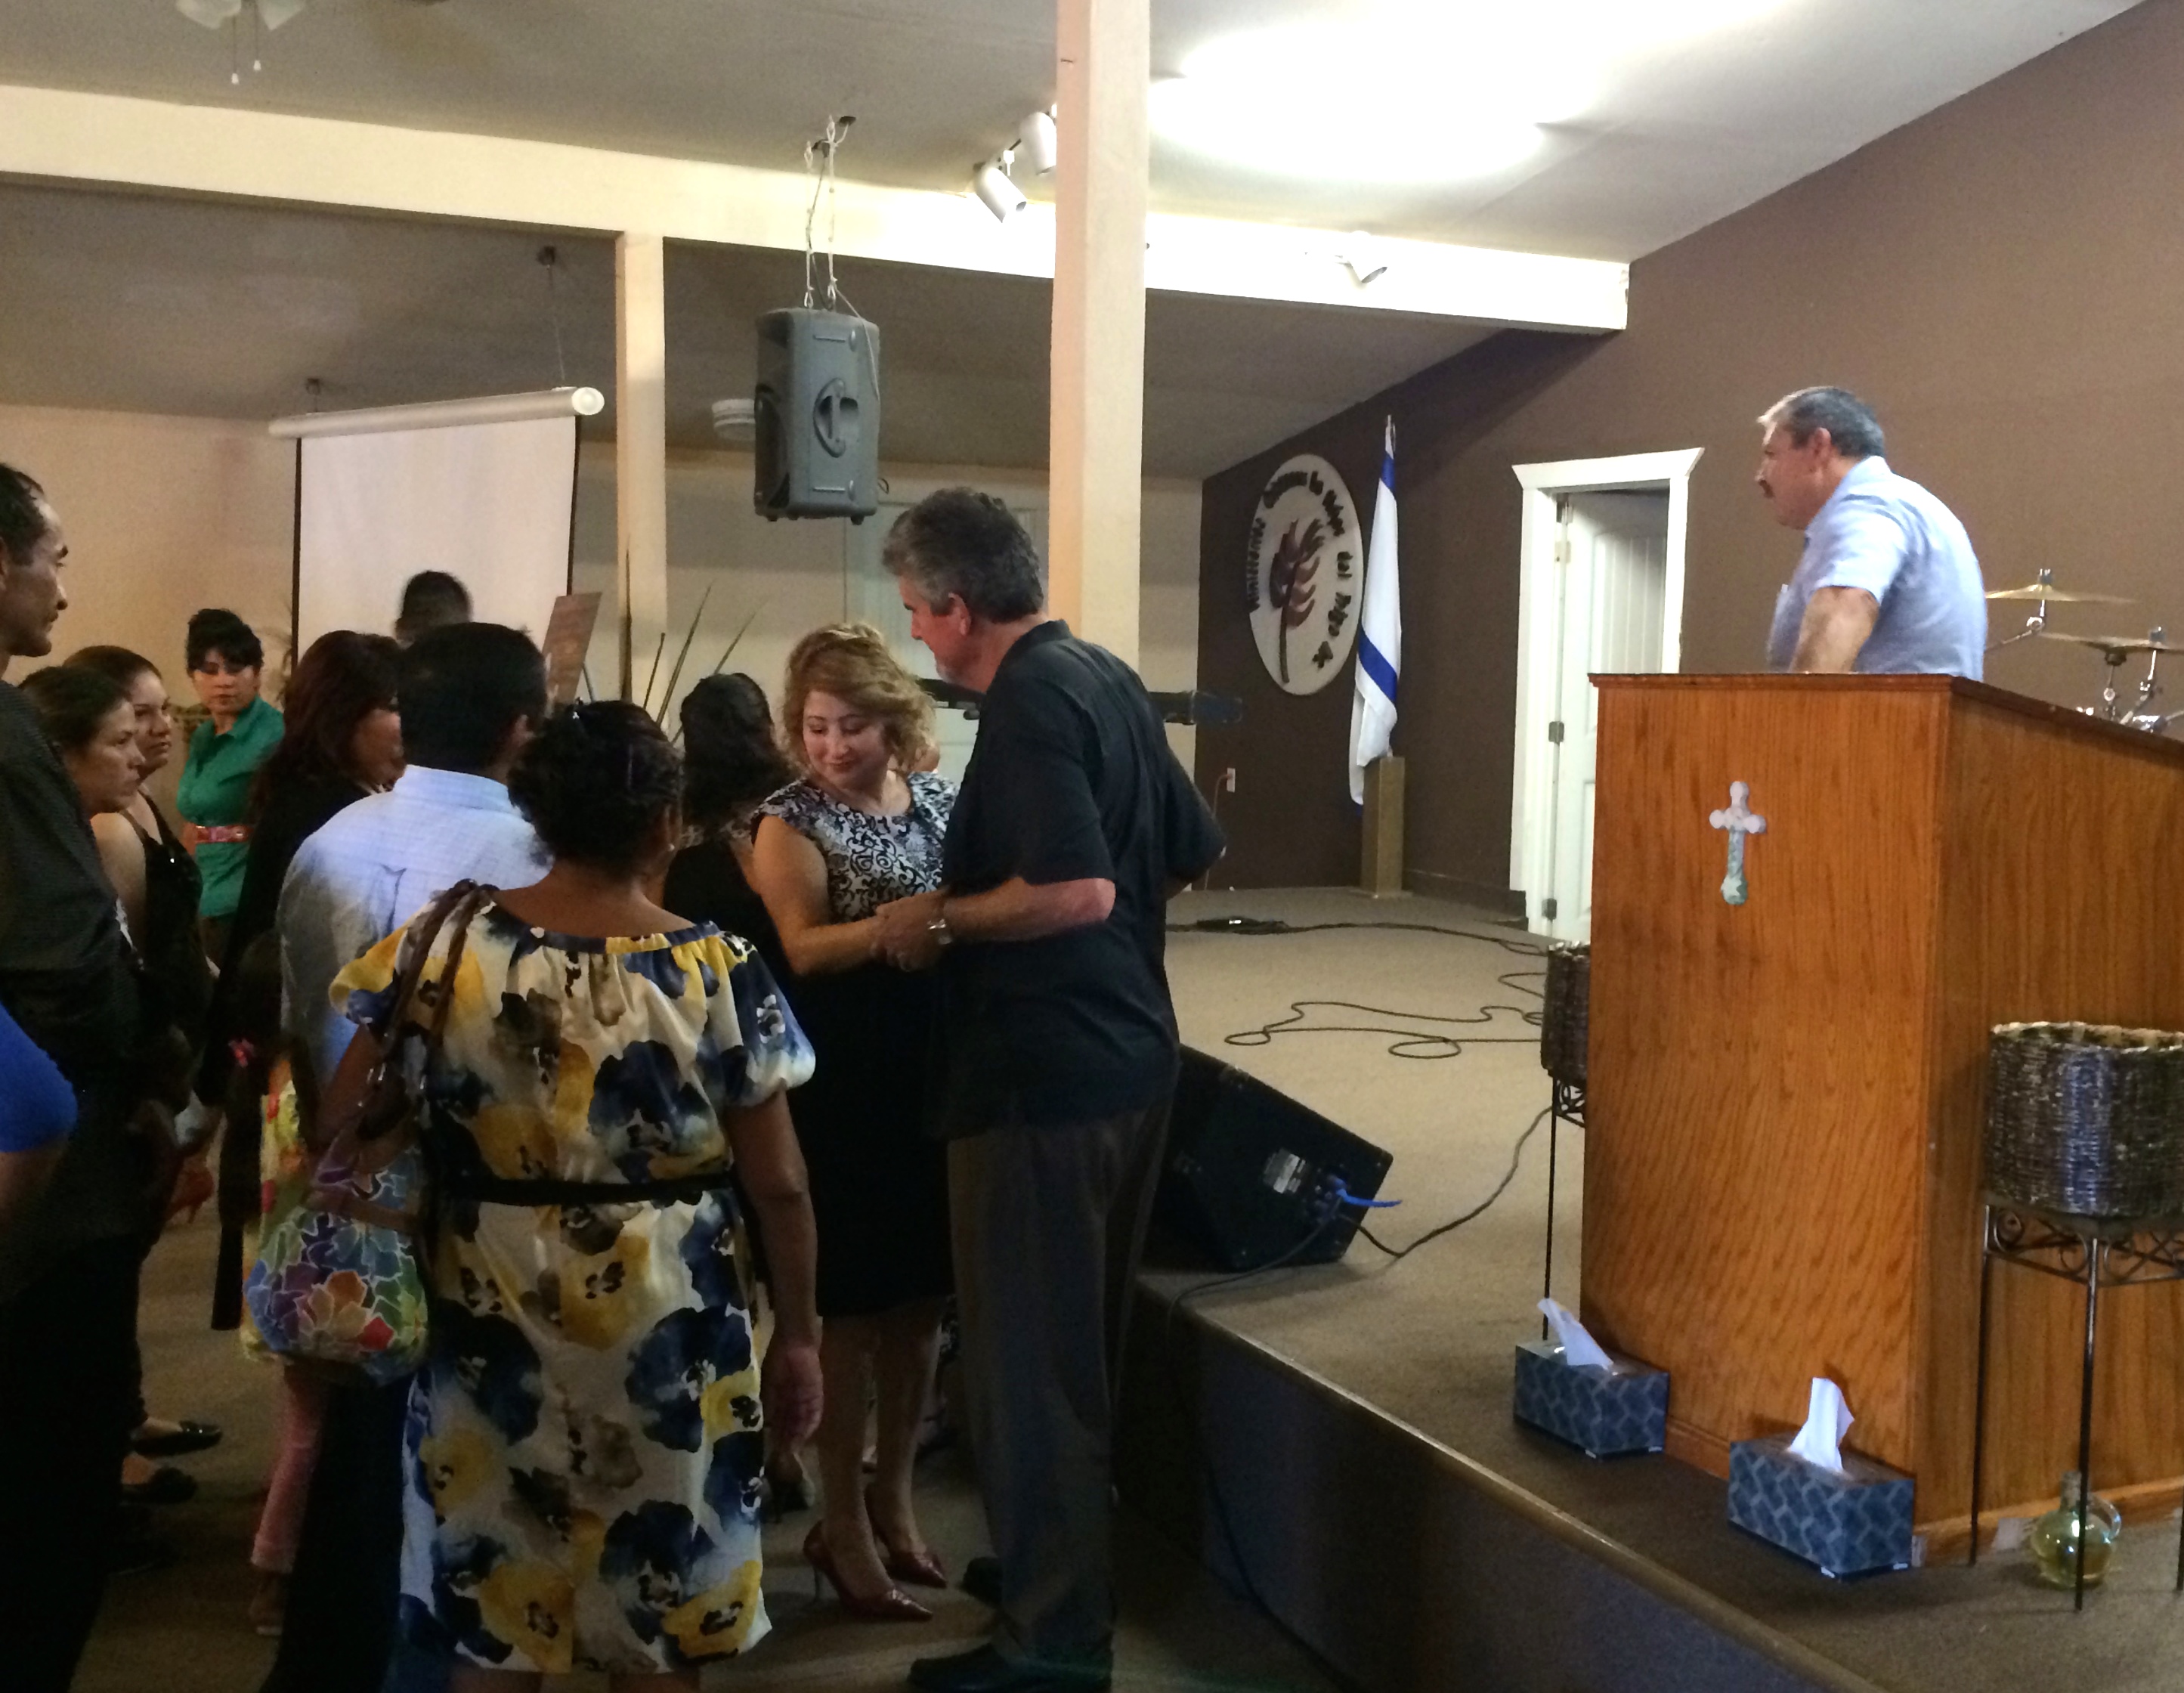 The people of Lo Mejor del Trigo comforting Scott and Susan after the service